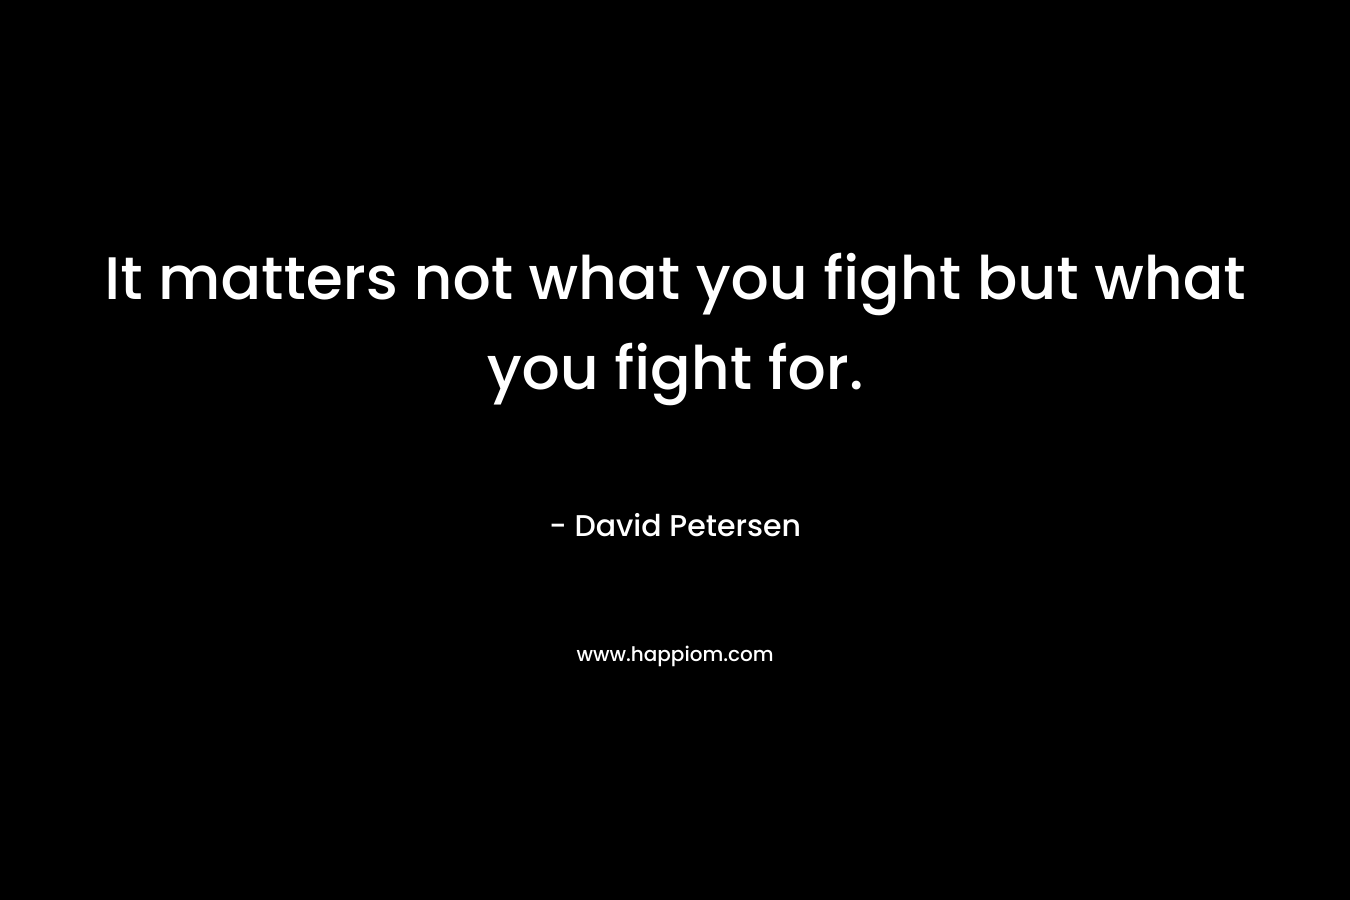 It matters not what you fight but what you fight for. – David Petersen